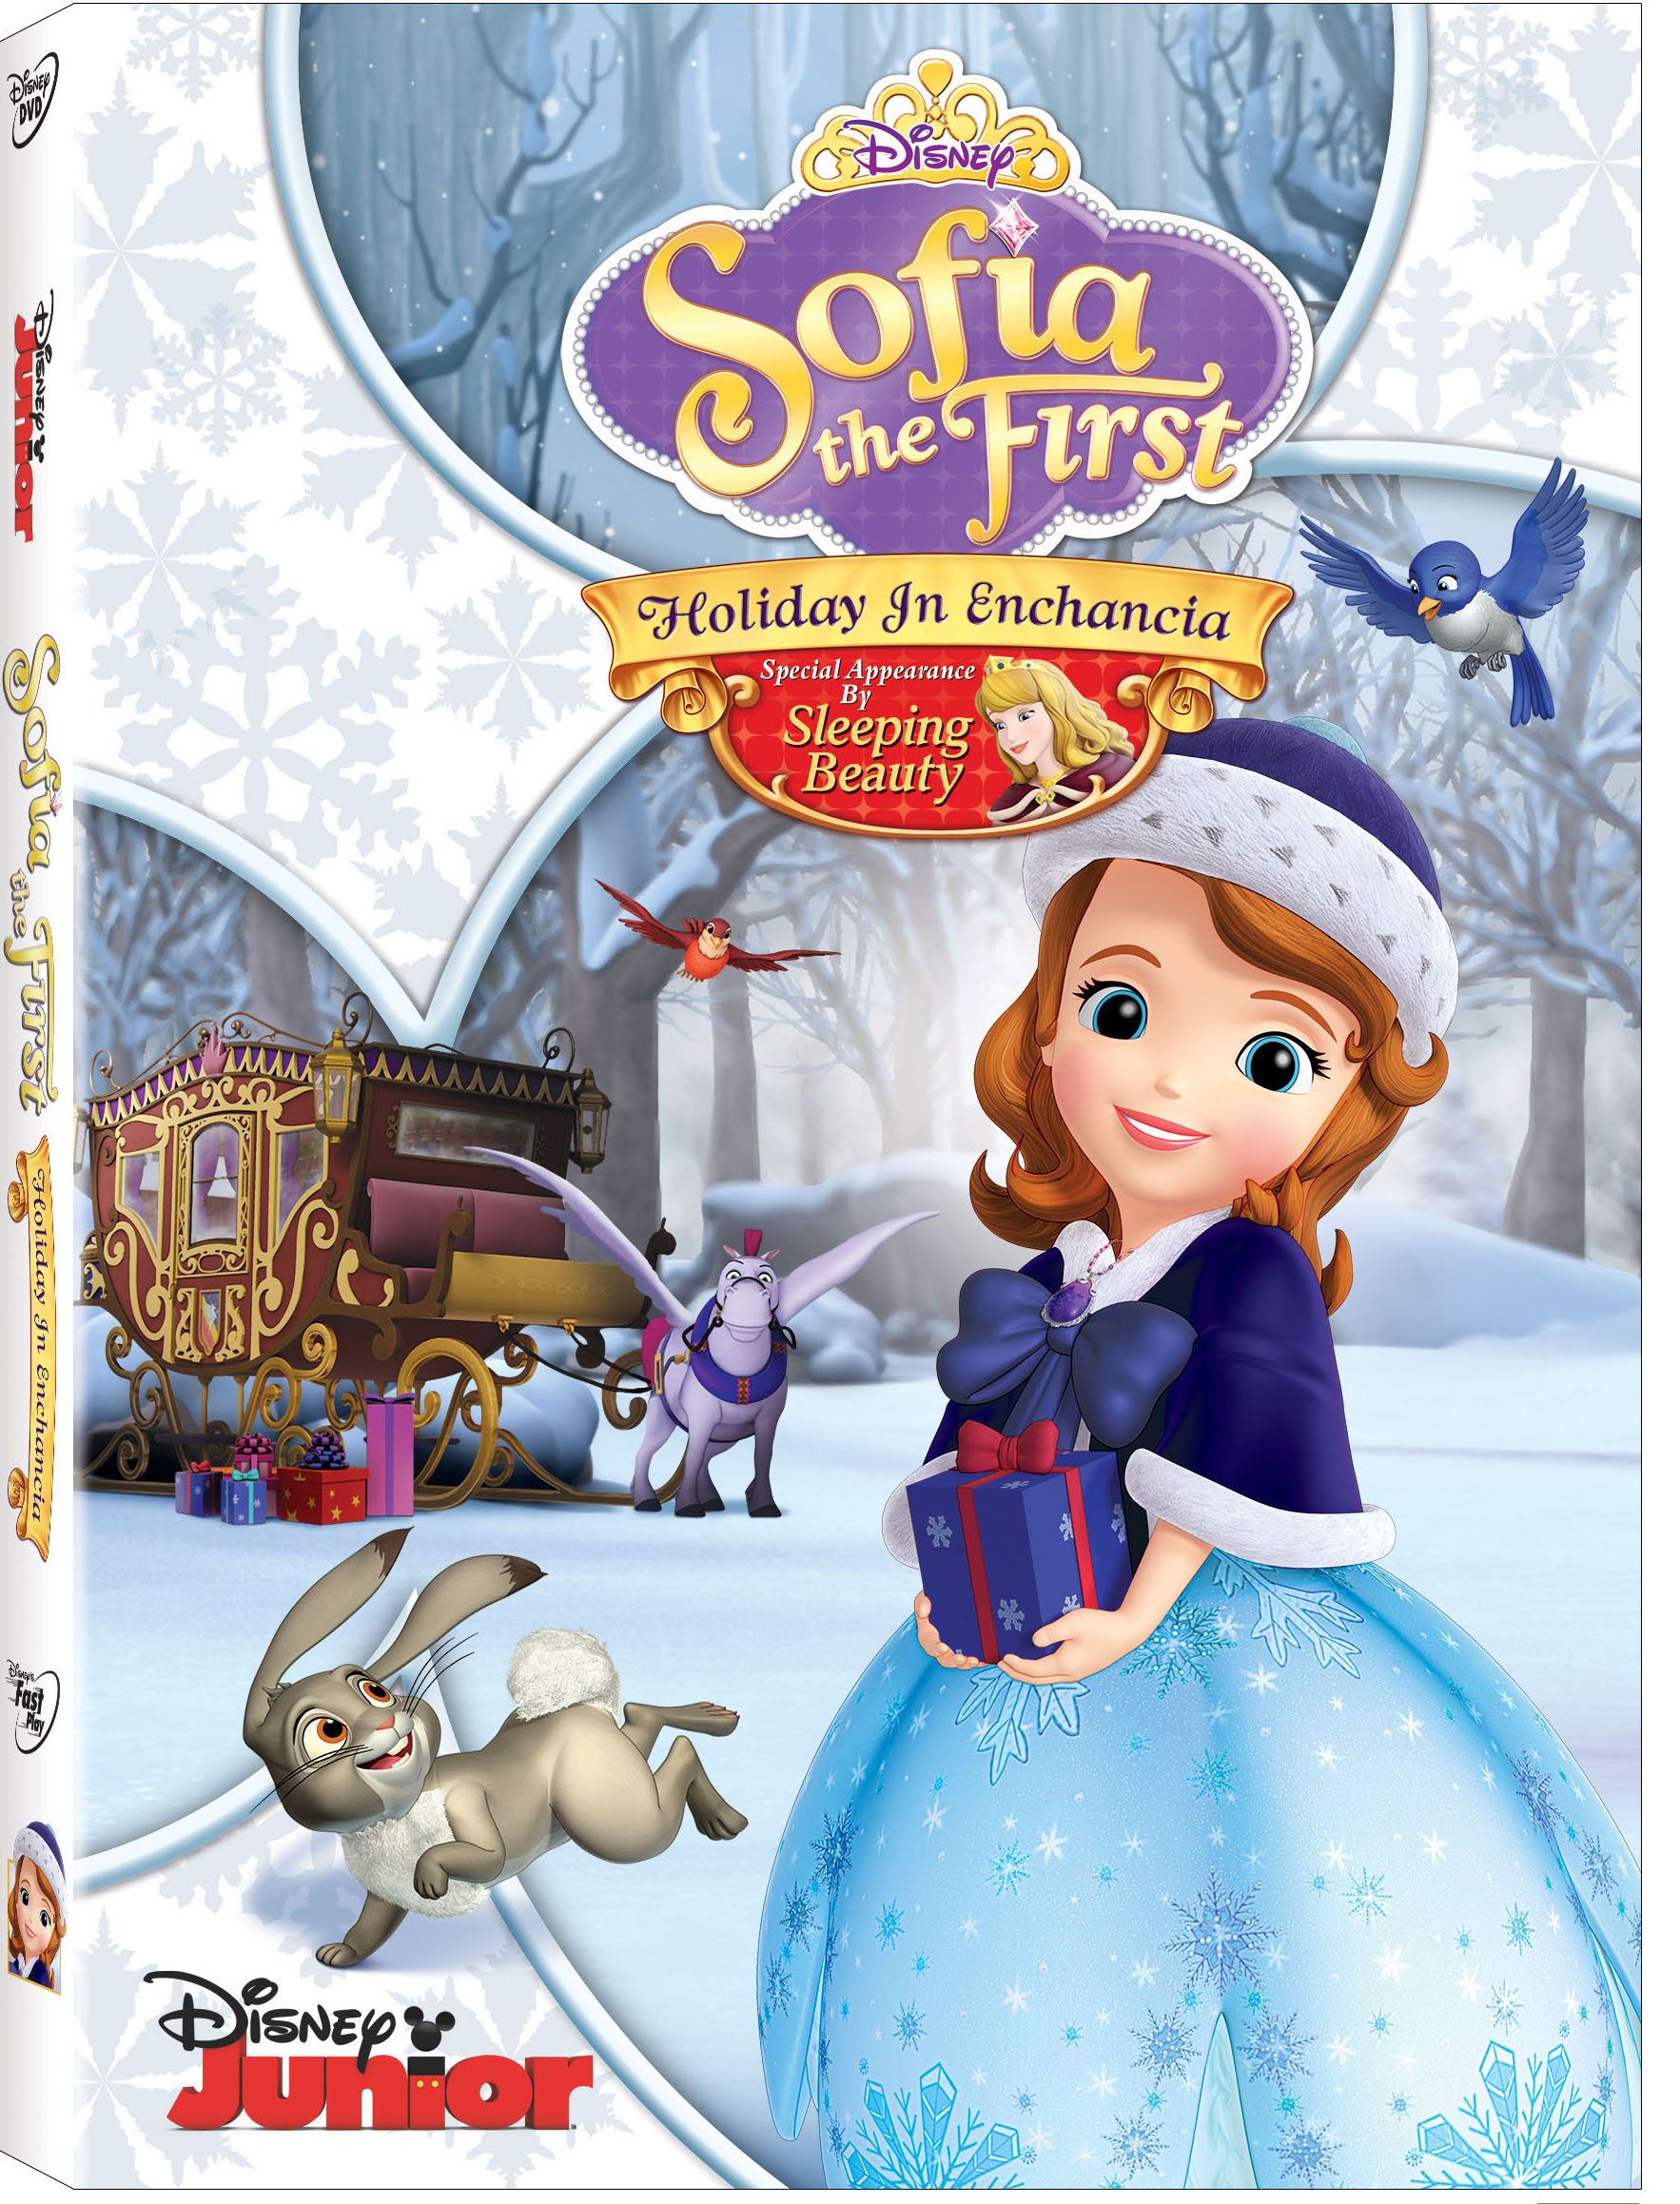 SofiaThe First: Holiday In Enchancia Coming to Disney DVD in November